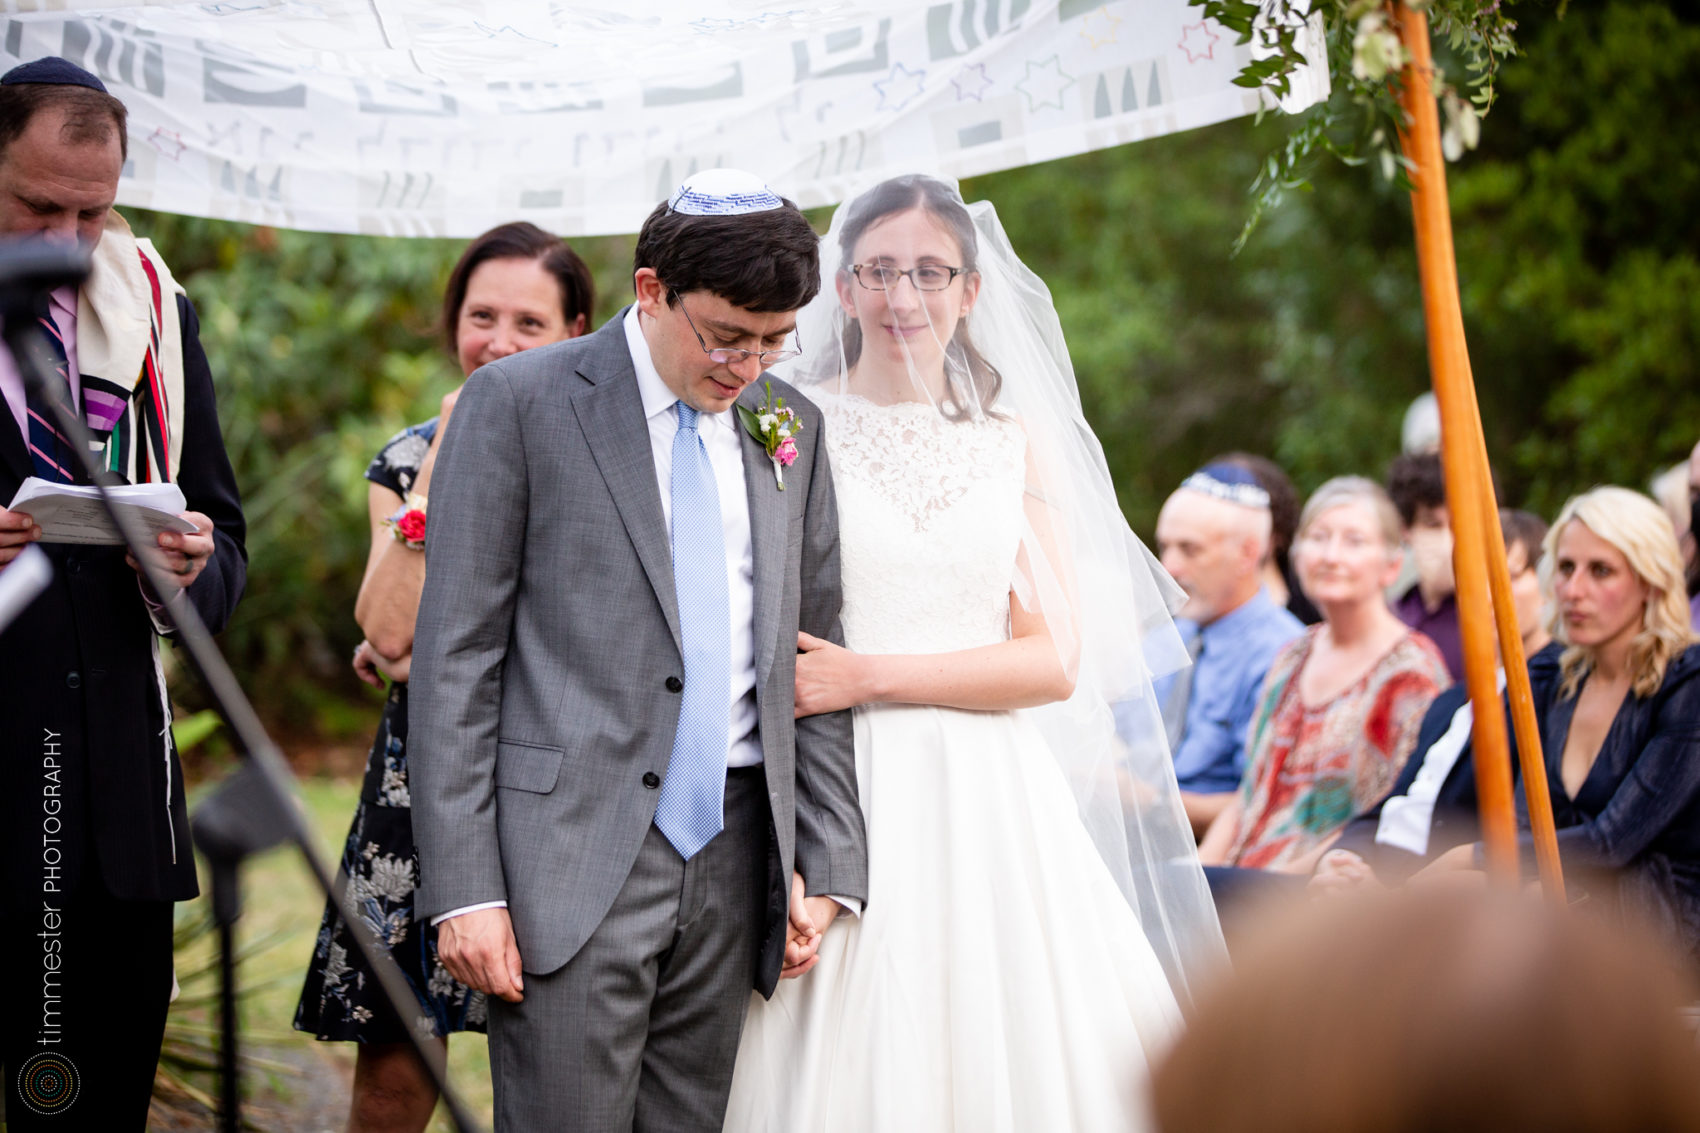 An outdoor Jewish wedding ceremony at the Museum of Life and Science in Durham, NC